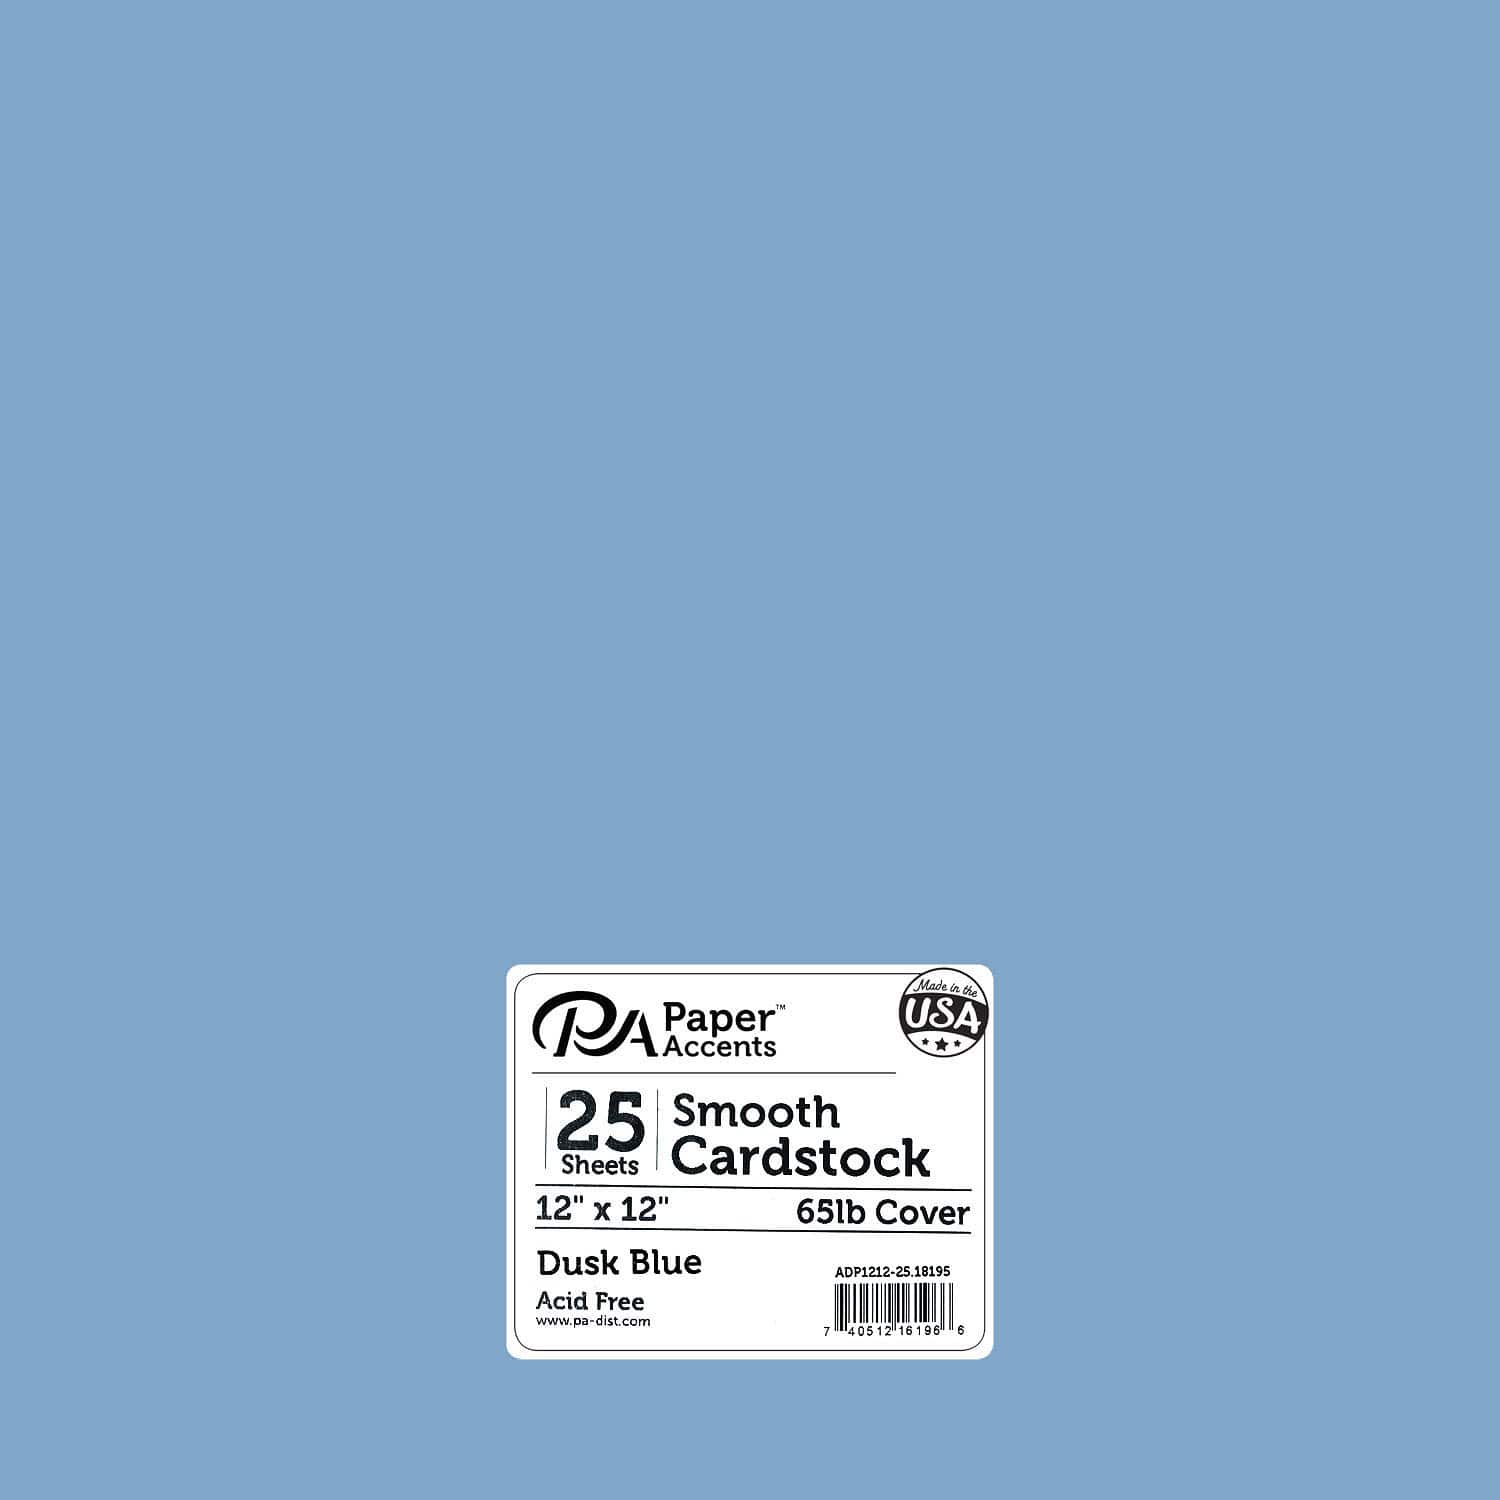 PA Paper™ Accents 12 x 12 Smooth Cardstock Paper, 25 Sheets